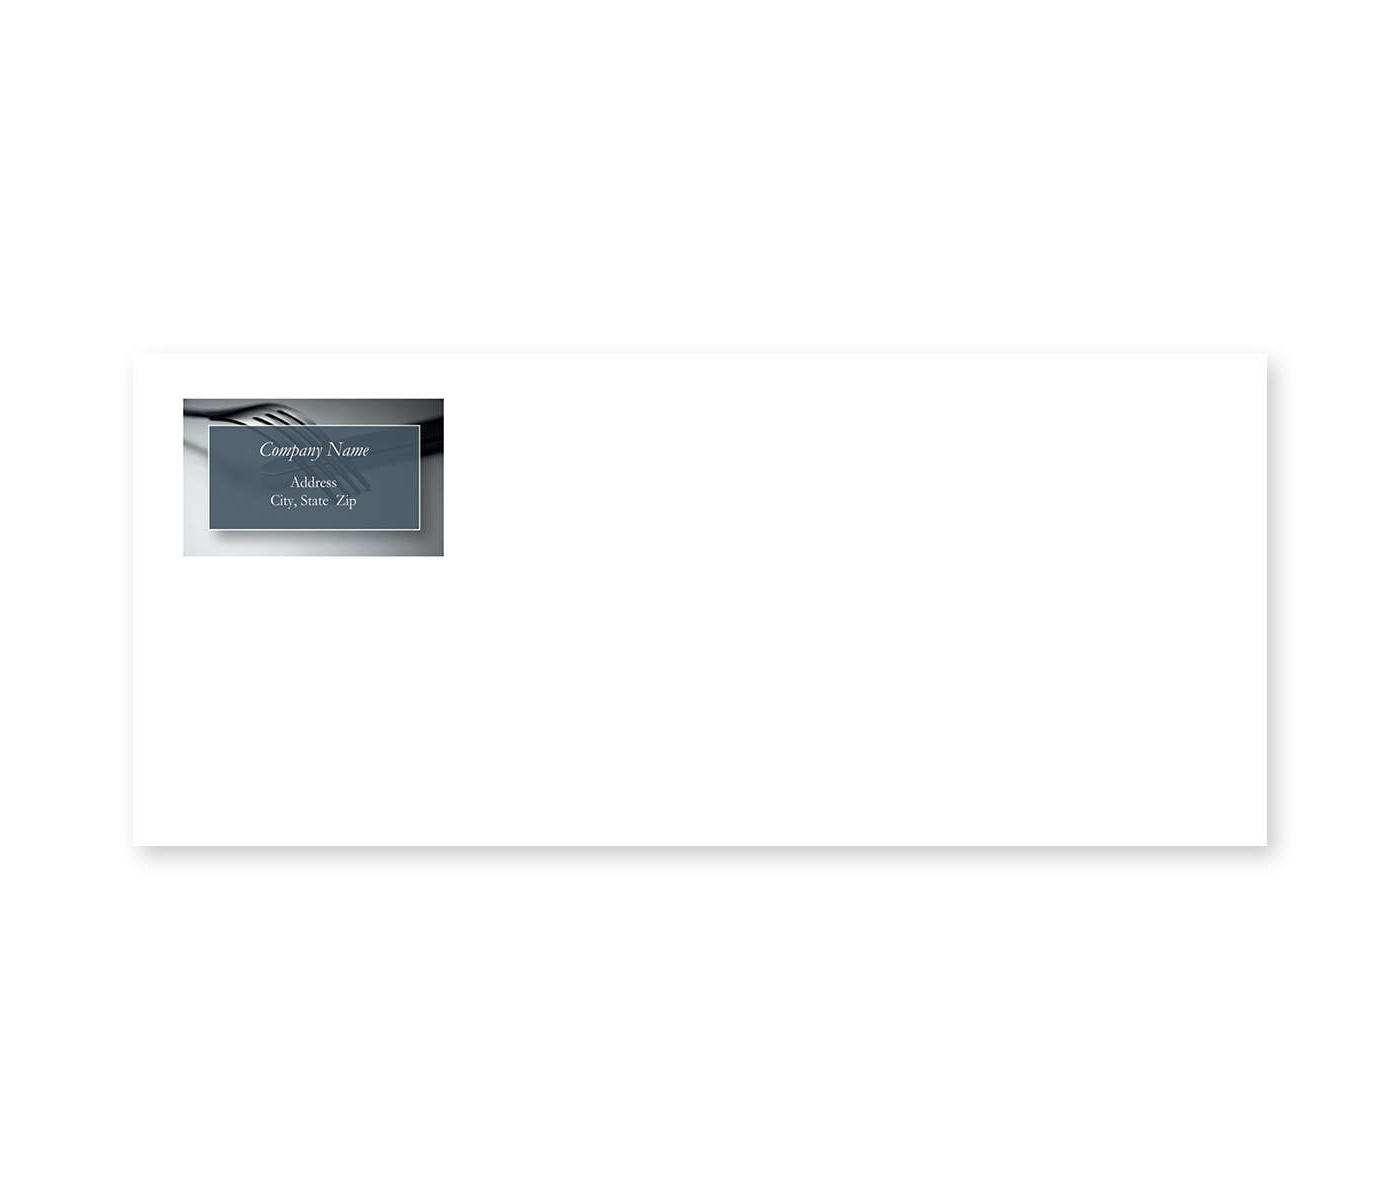 At Your Service Envelope No. 10